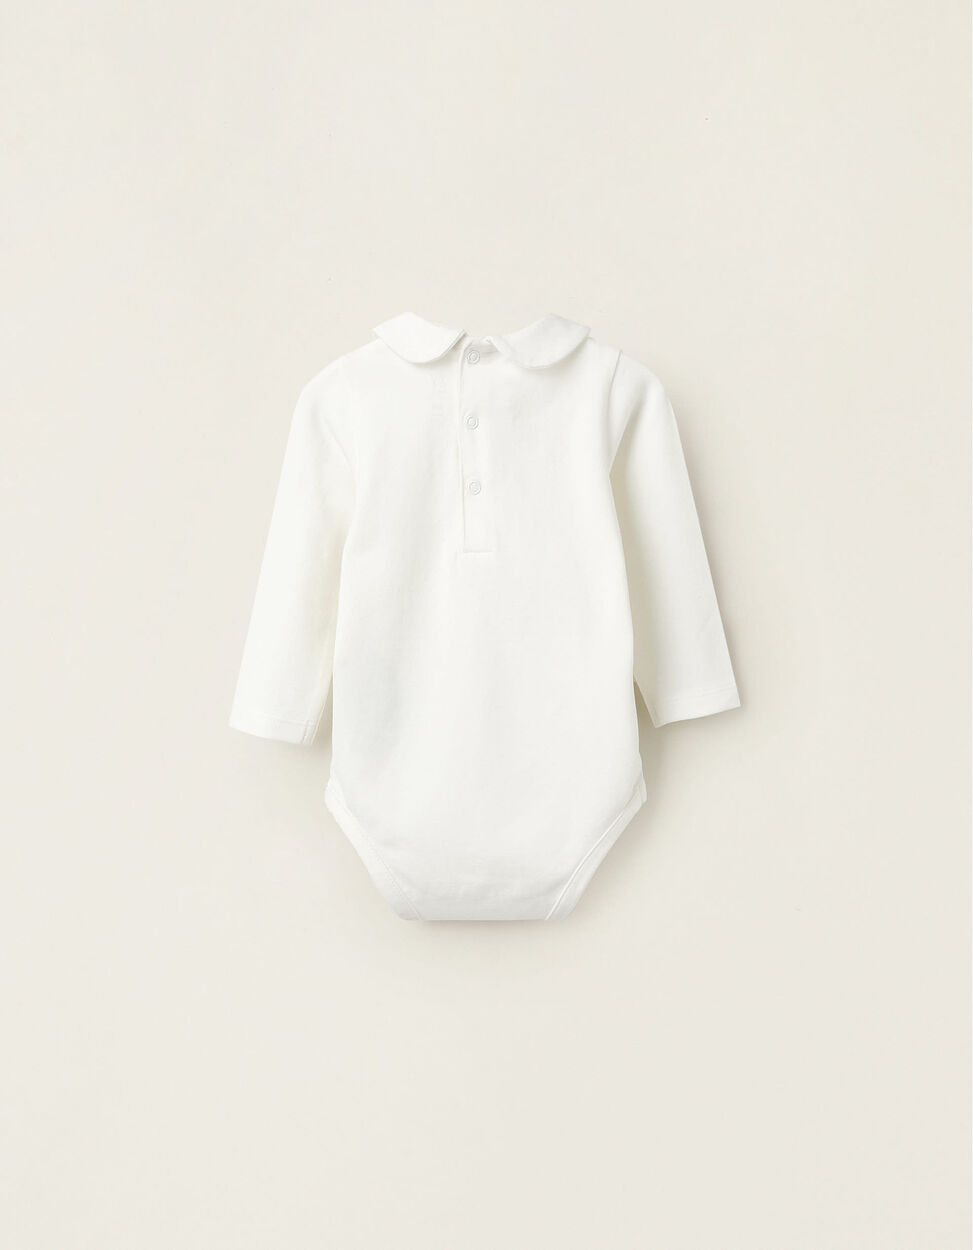 Buy Online Pack of 2 Bodysuits with Peter Pan Collar for Newborn Girls, white